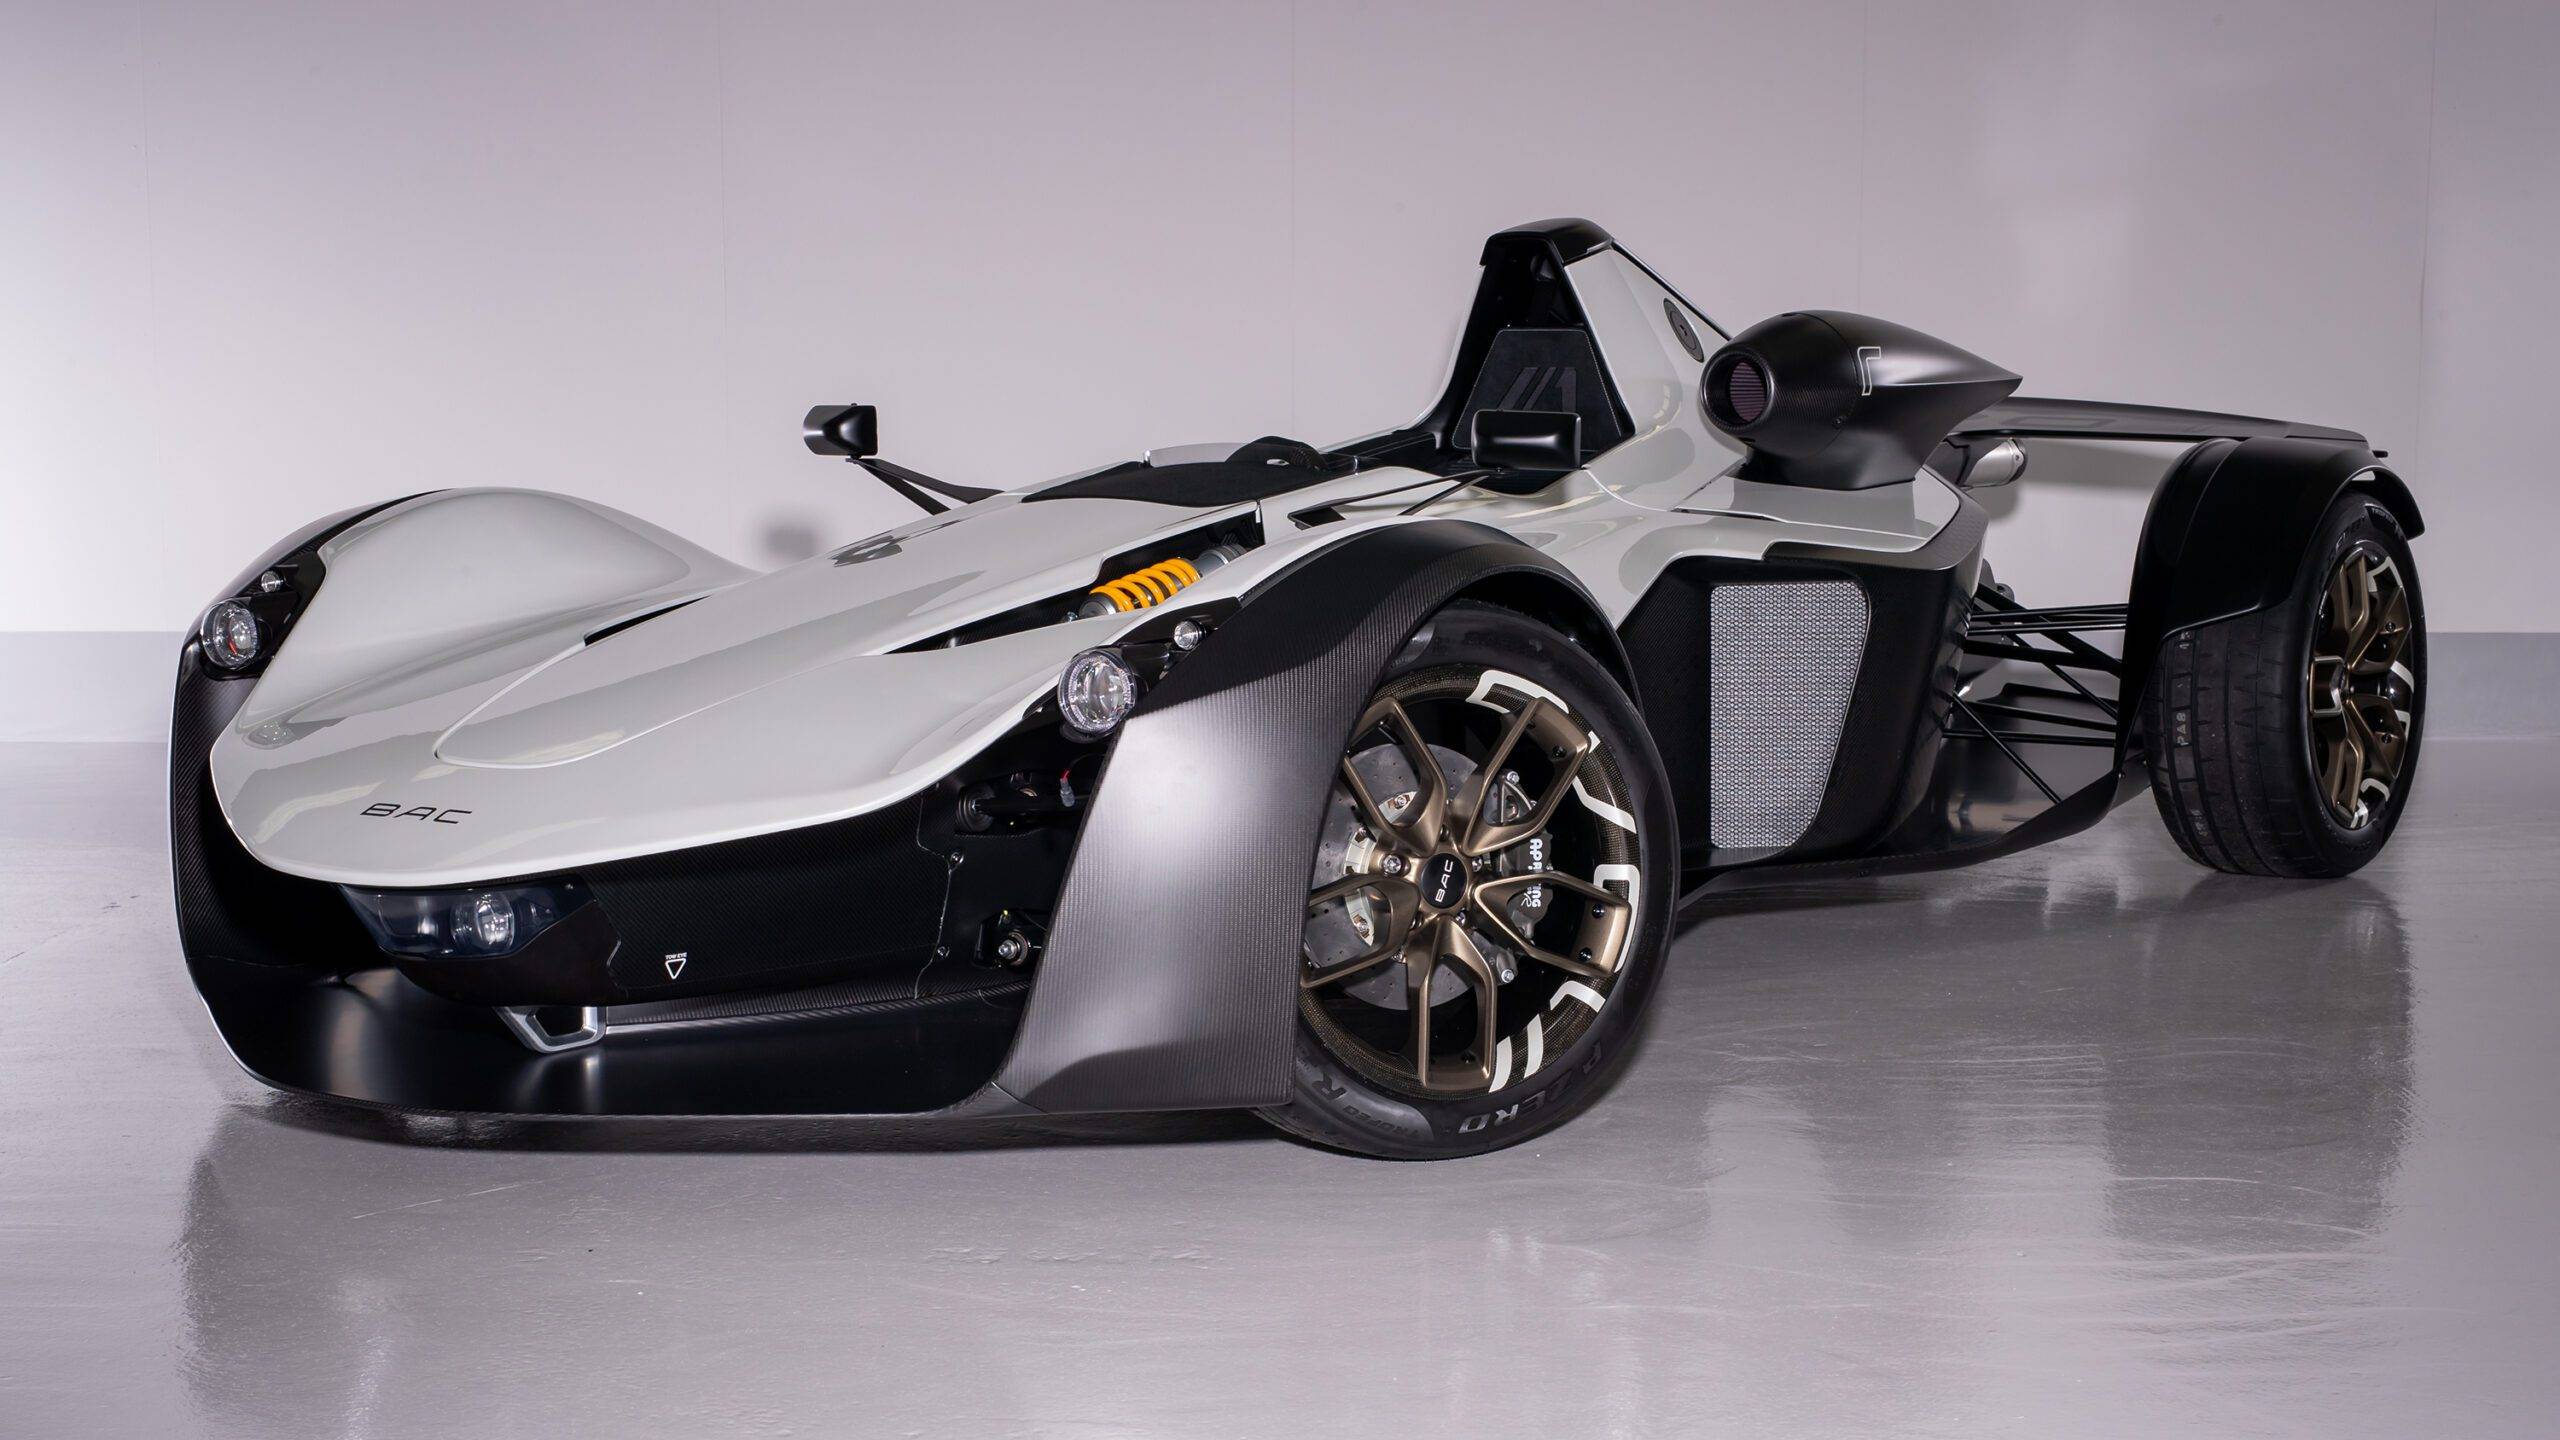 The BAC Mono in grey with black accents, parked up.